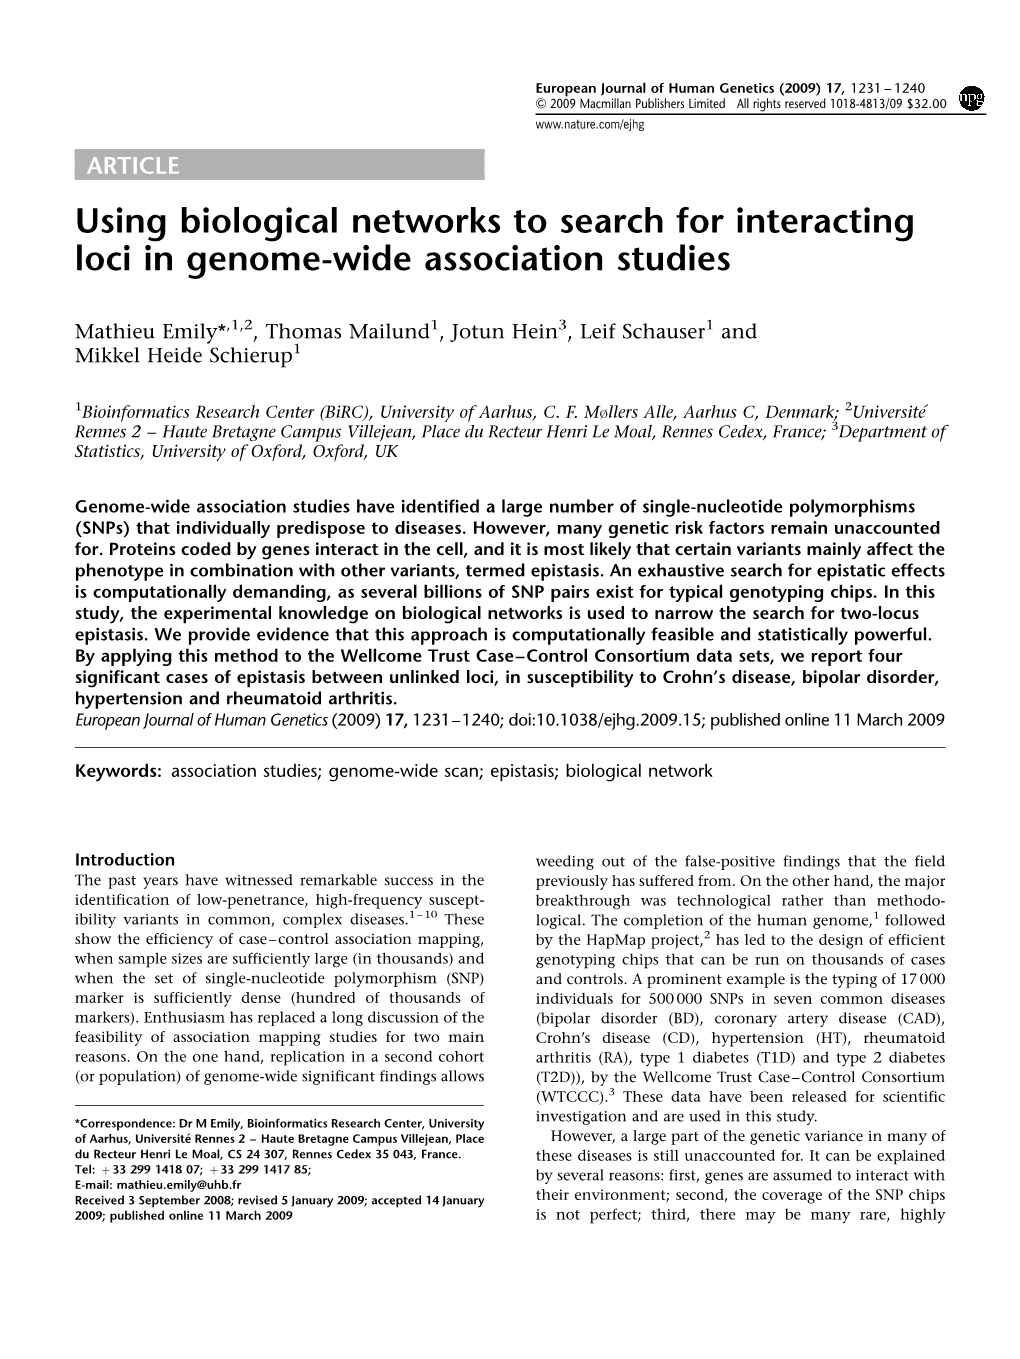 Using Biological Networks to Search for Interacting Loci in Genome-Wide Association Studies